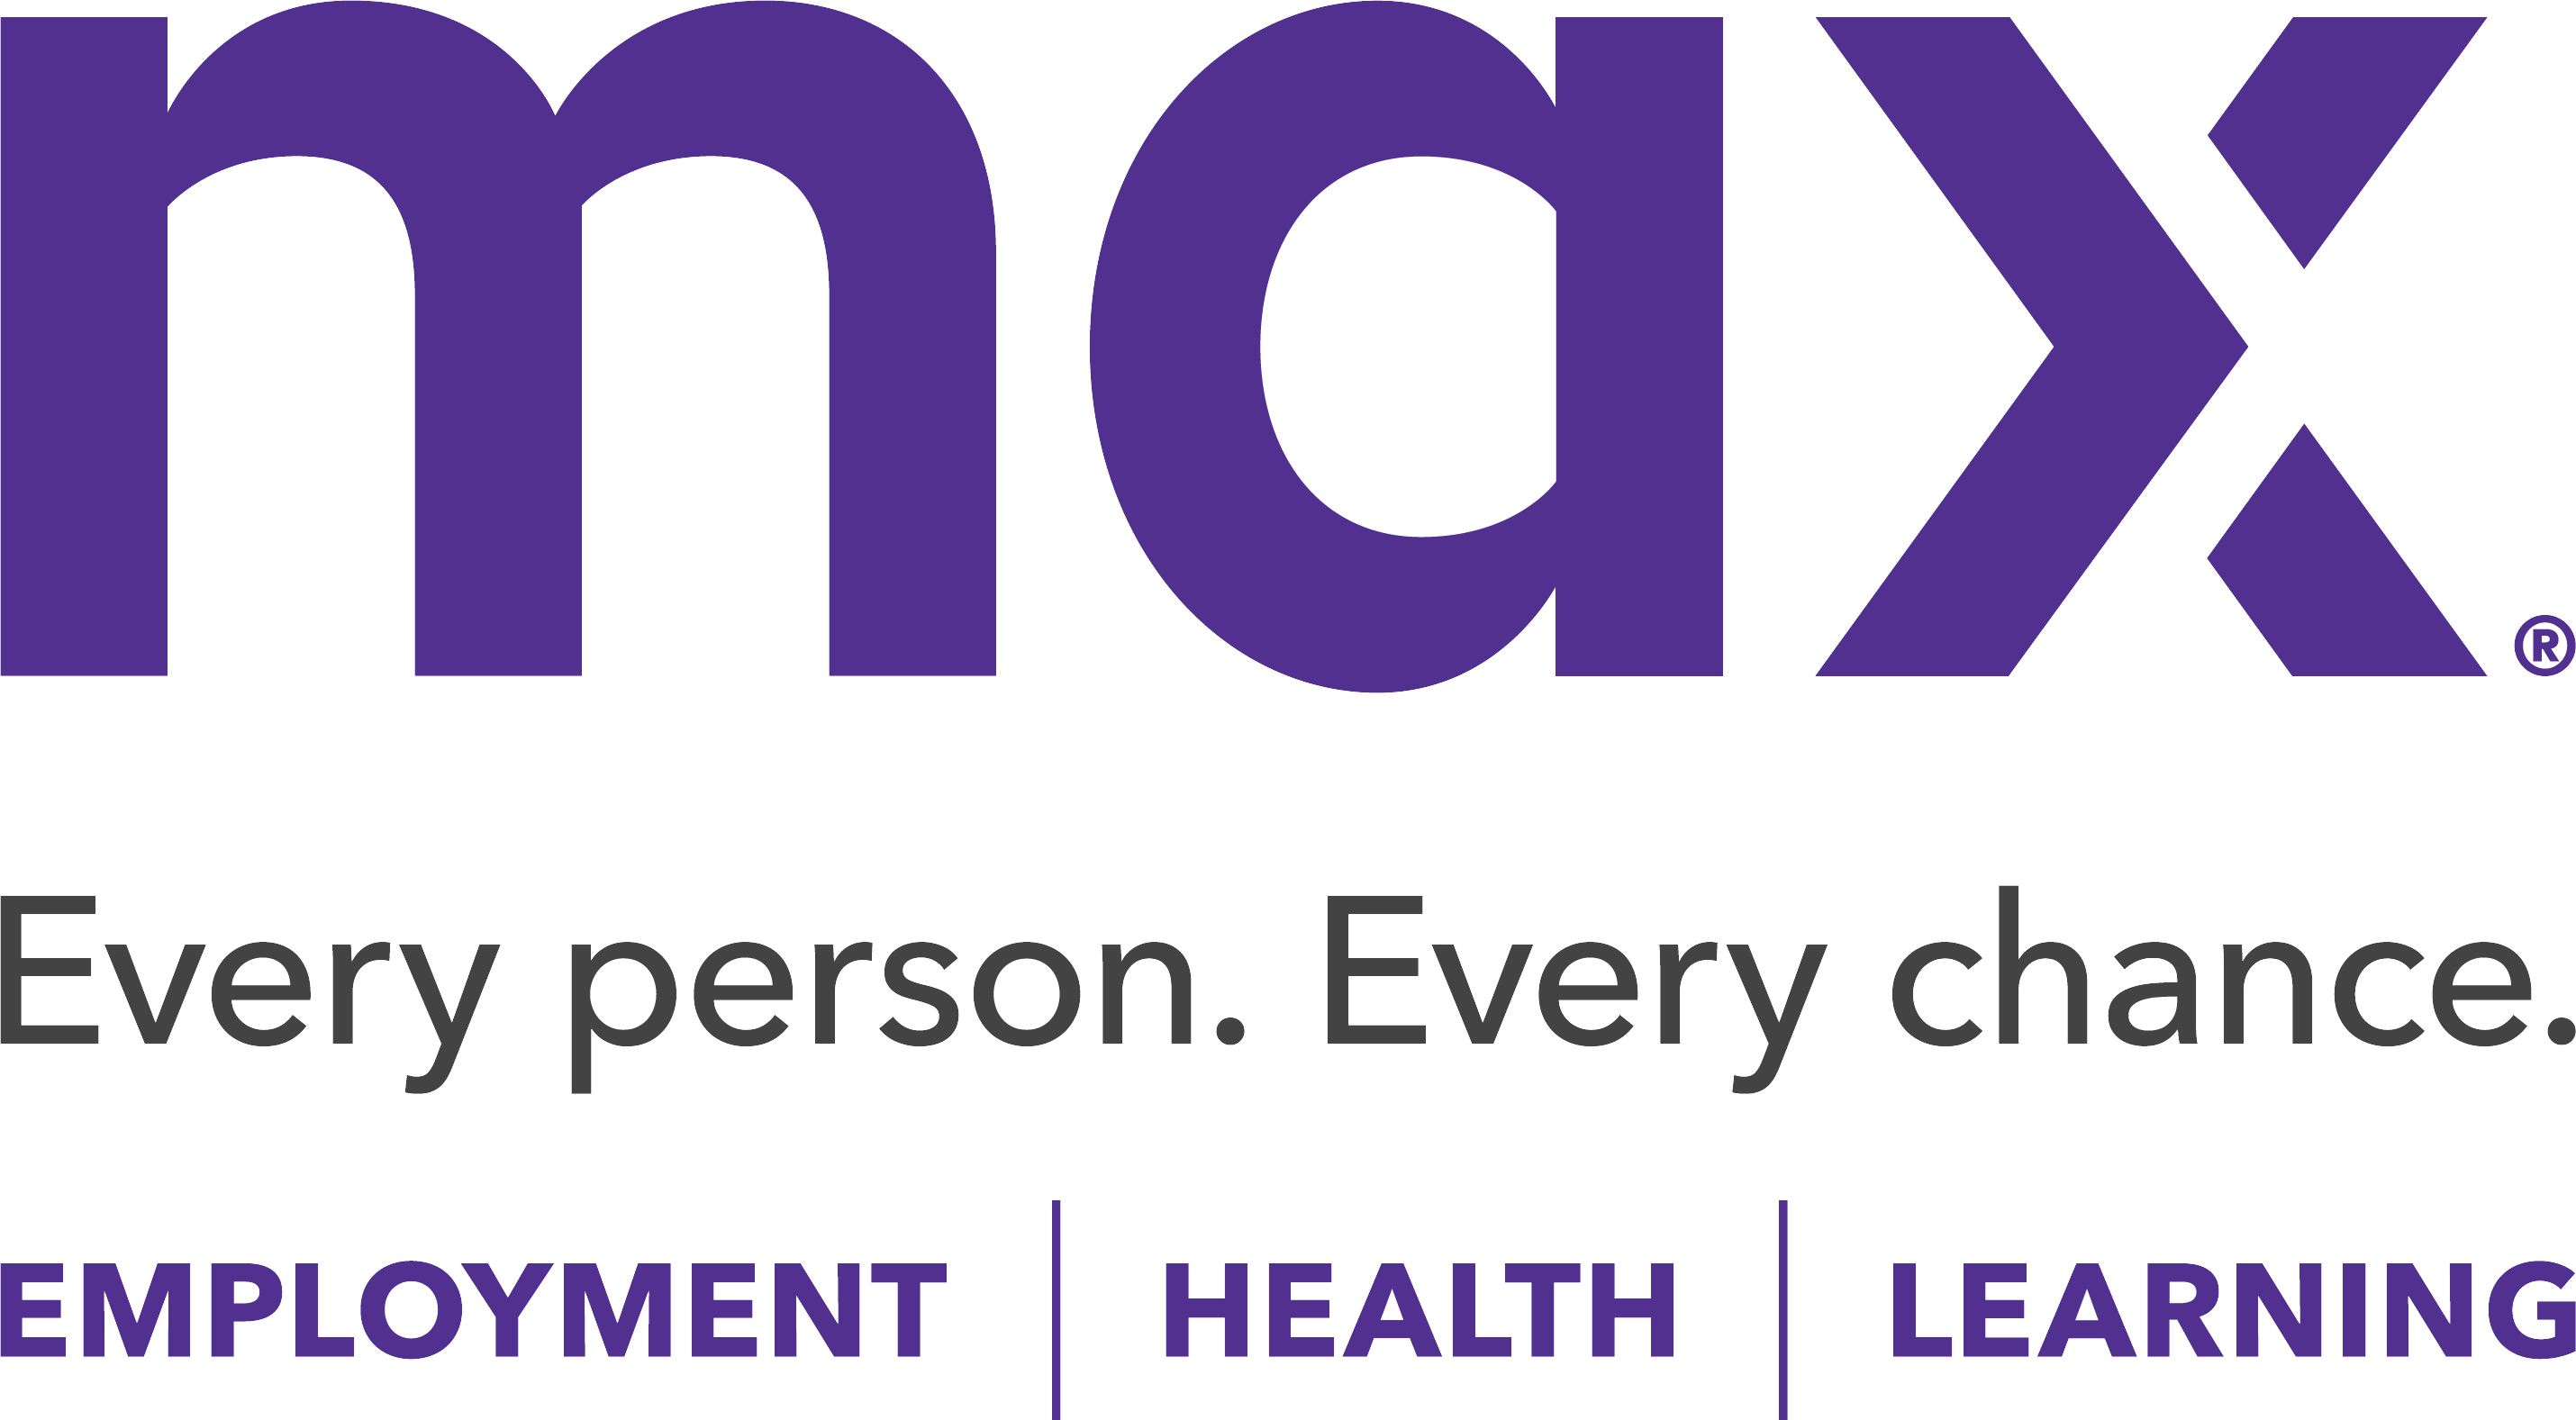 MAX Solutions